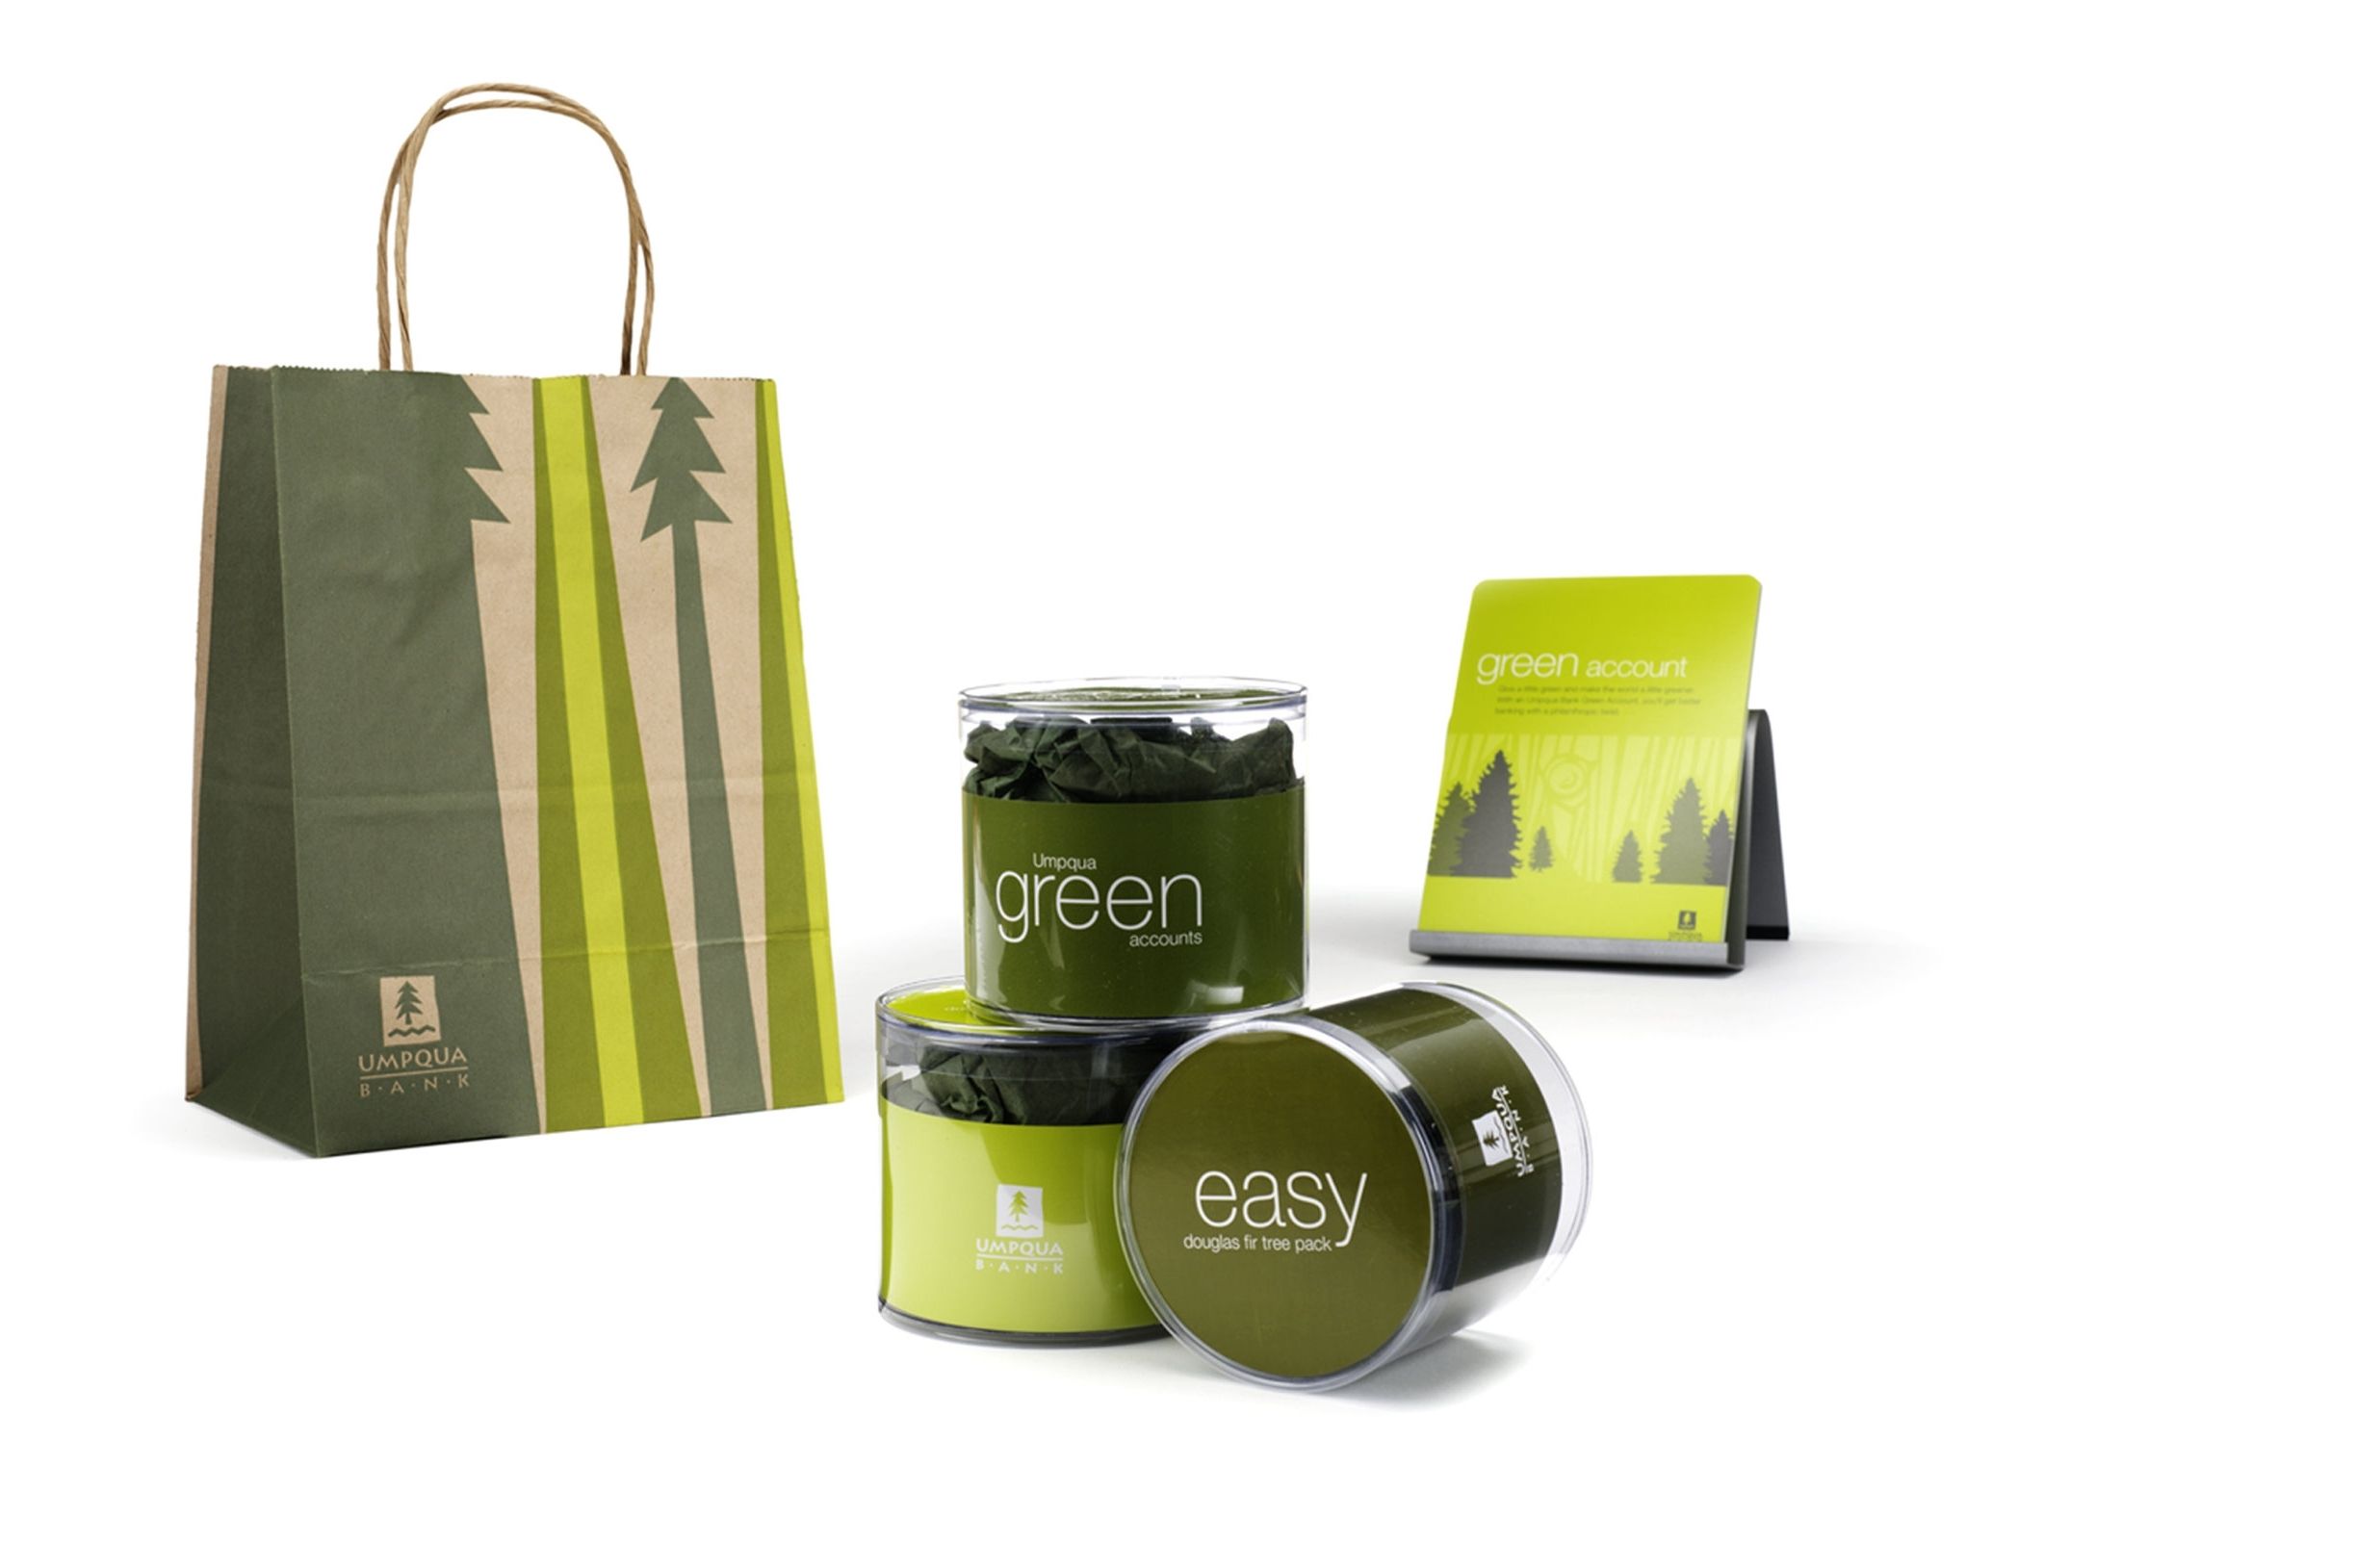 Paper bag with the Umpqua Bank logo and green illustrated trees, three jars containing Douglas fir cones, and a green business card that says “green account”